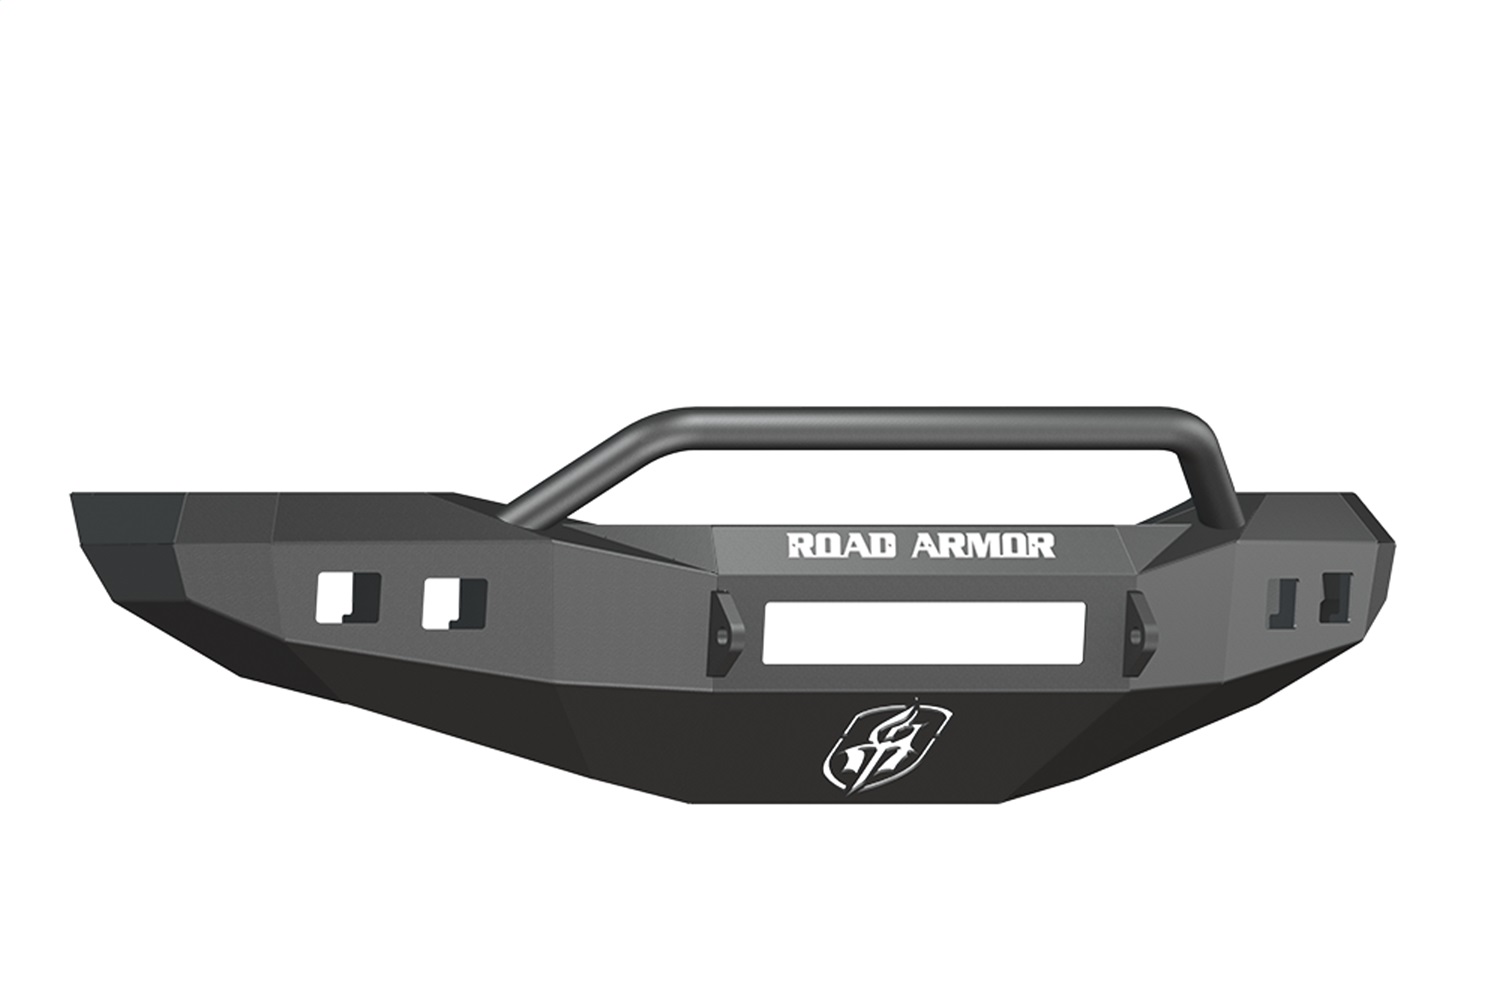 Road Armor Road Armor 406R4B-NW Front Stealth Bumper Fits 06-09 Ram 2500 Ram 3500